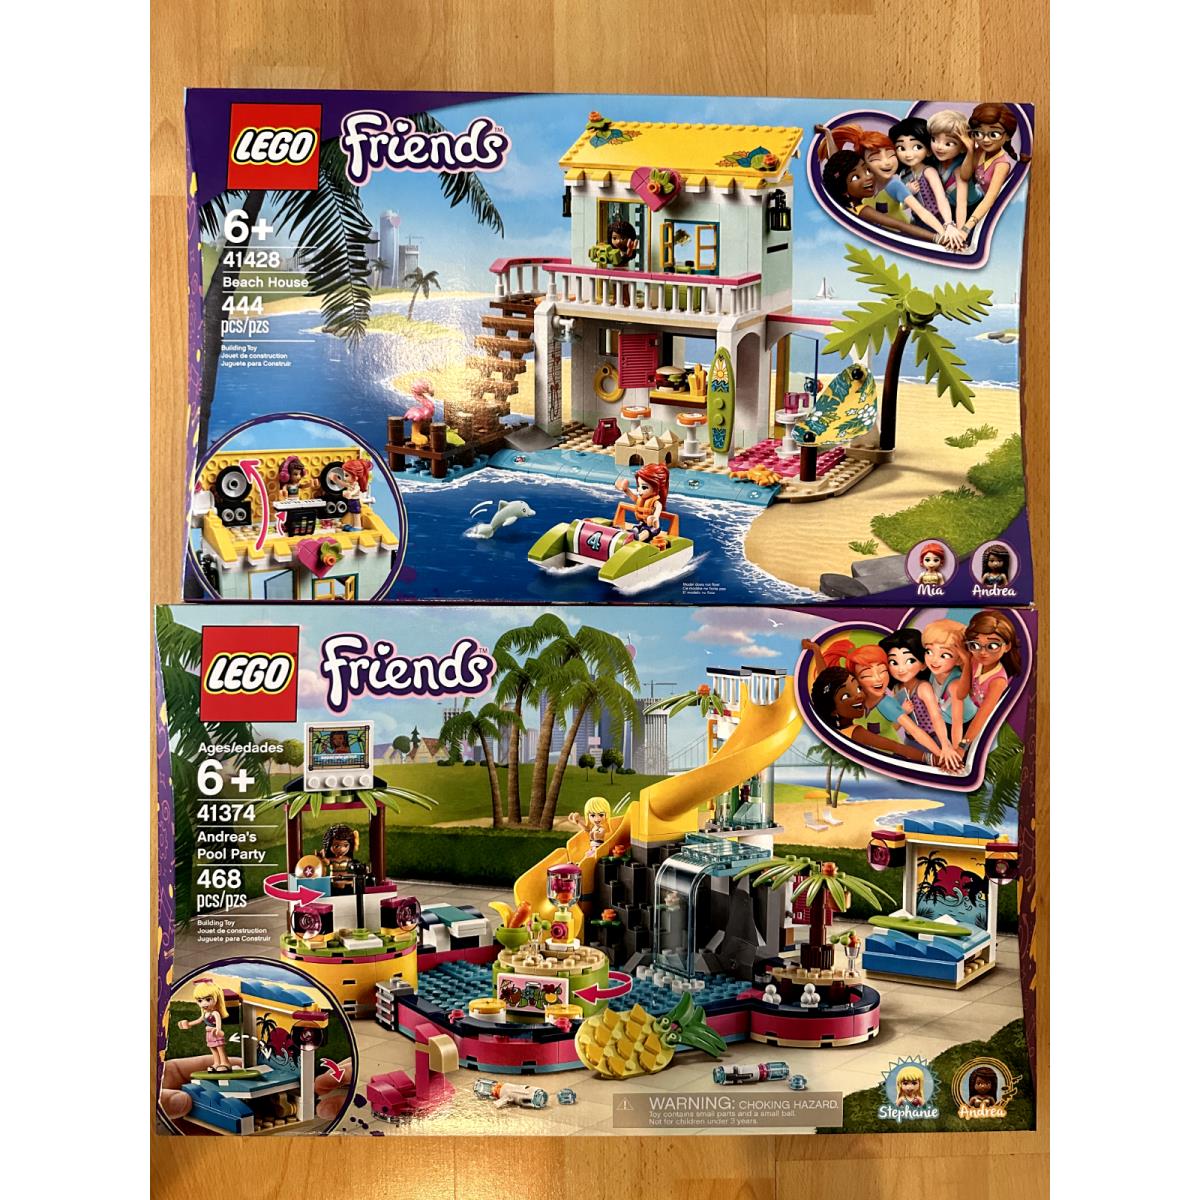 Lego Friends 2 Sets 41374 Andrea`s Pool Party 41428 Beach House Nisb